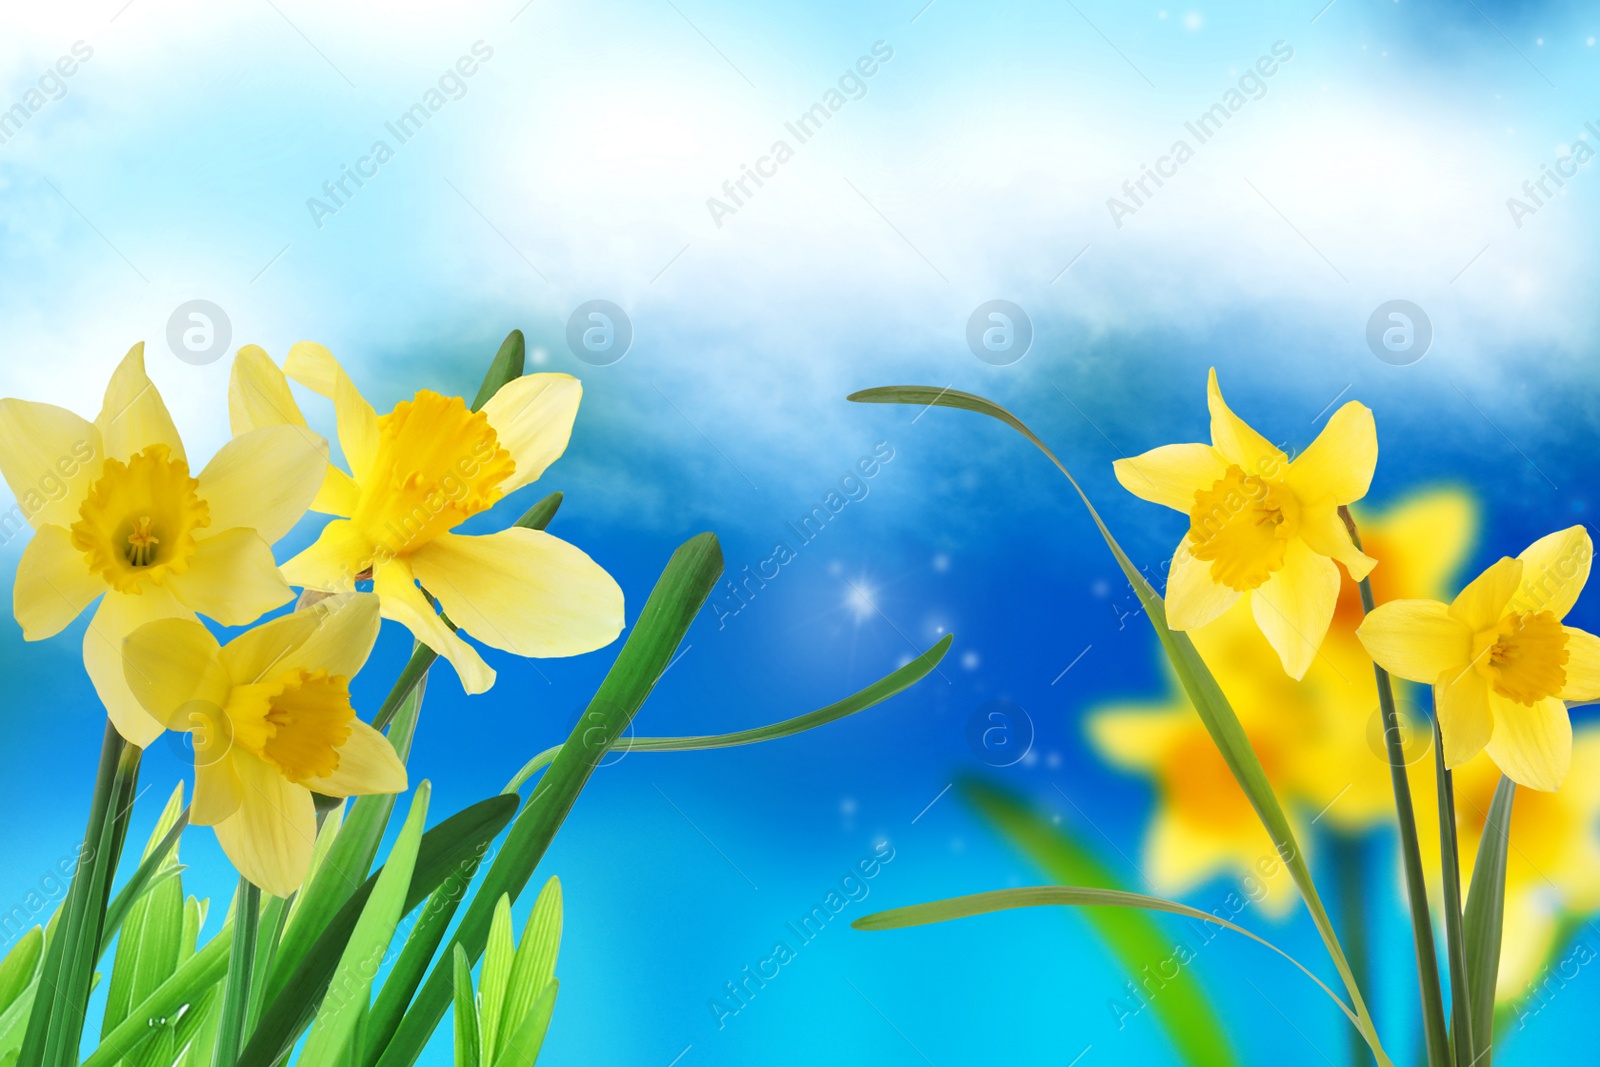 Image of Beautiful yellow daffodils outdoors on sunny day 